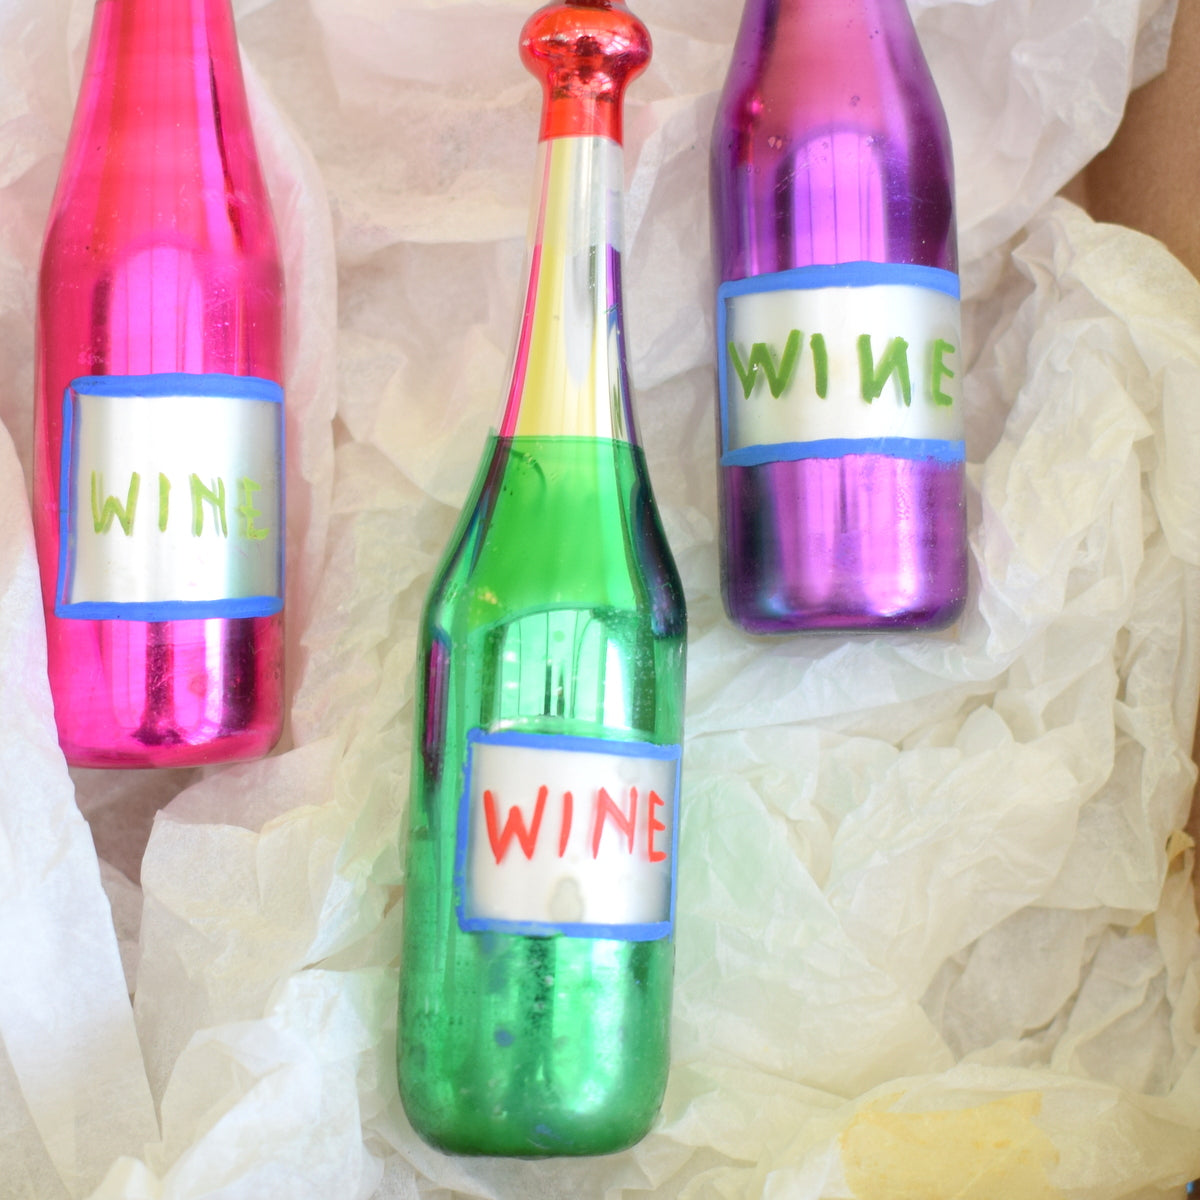 Vintage 1950s Rare Glass Christmas Decorations x3 - Wine Bottles - Pink, Green & Purple - Boxed